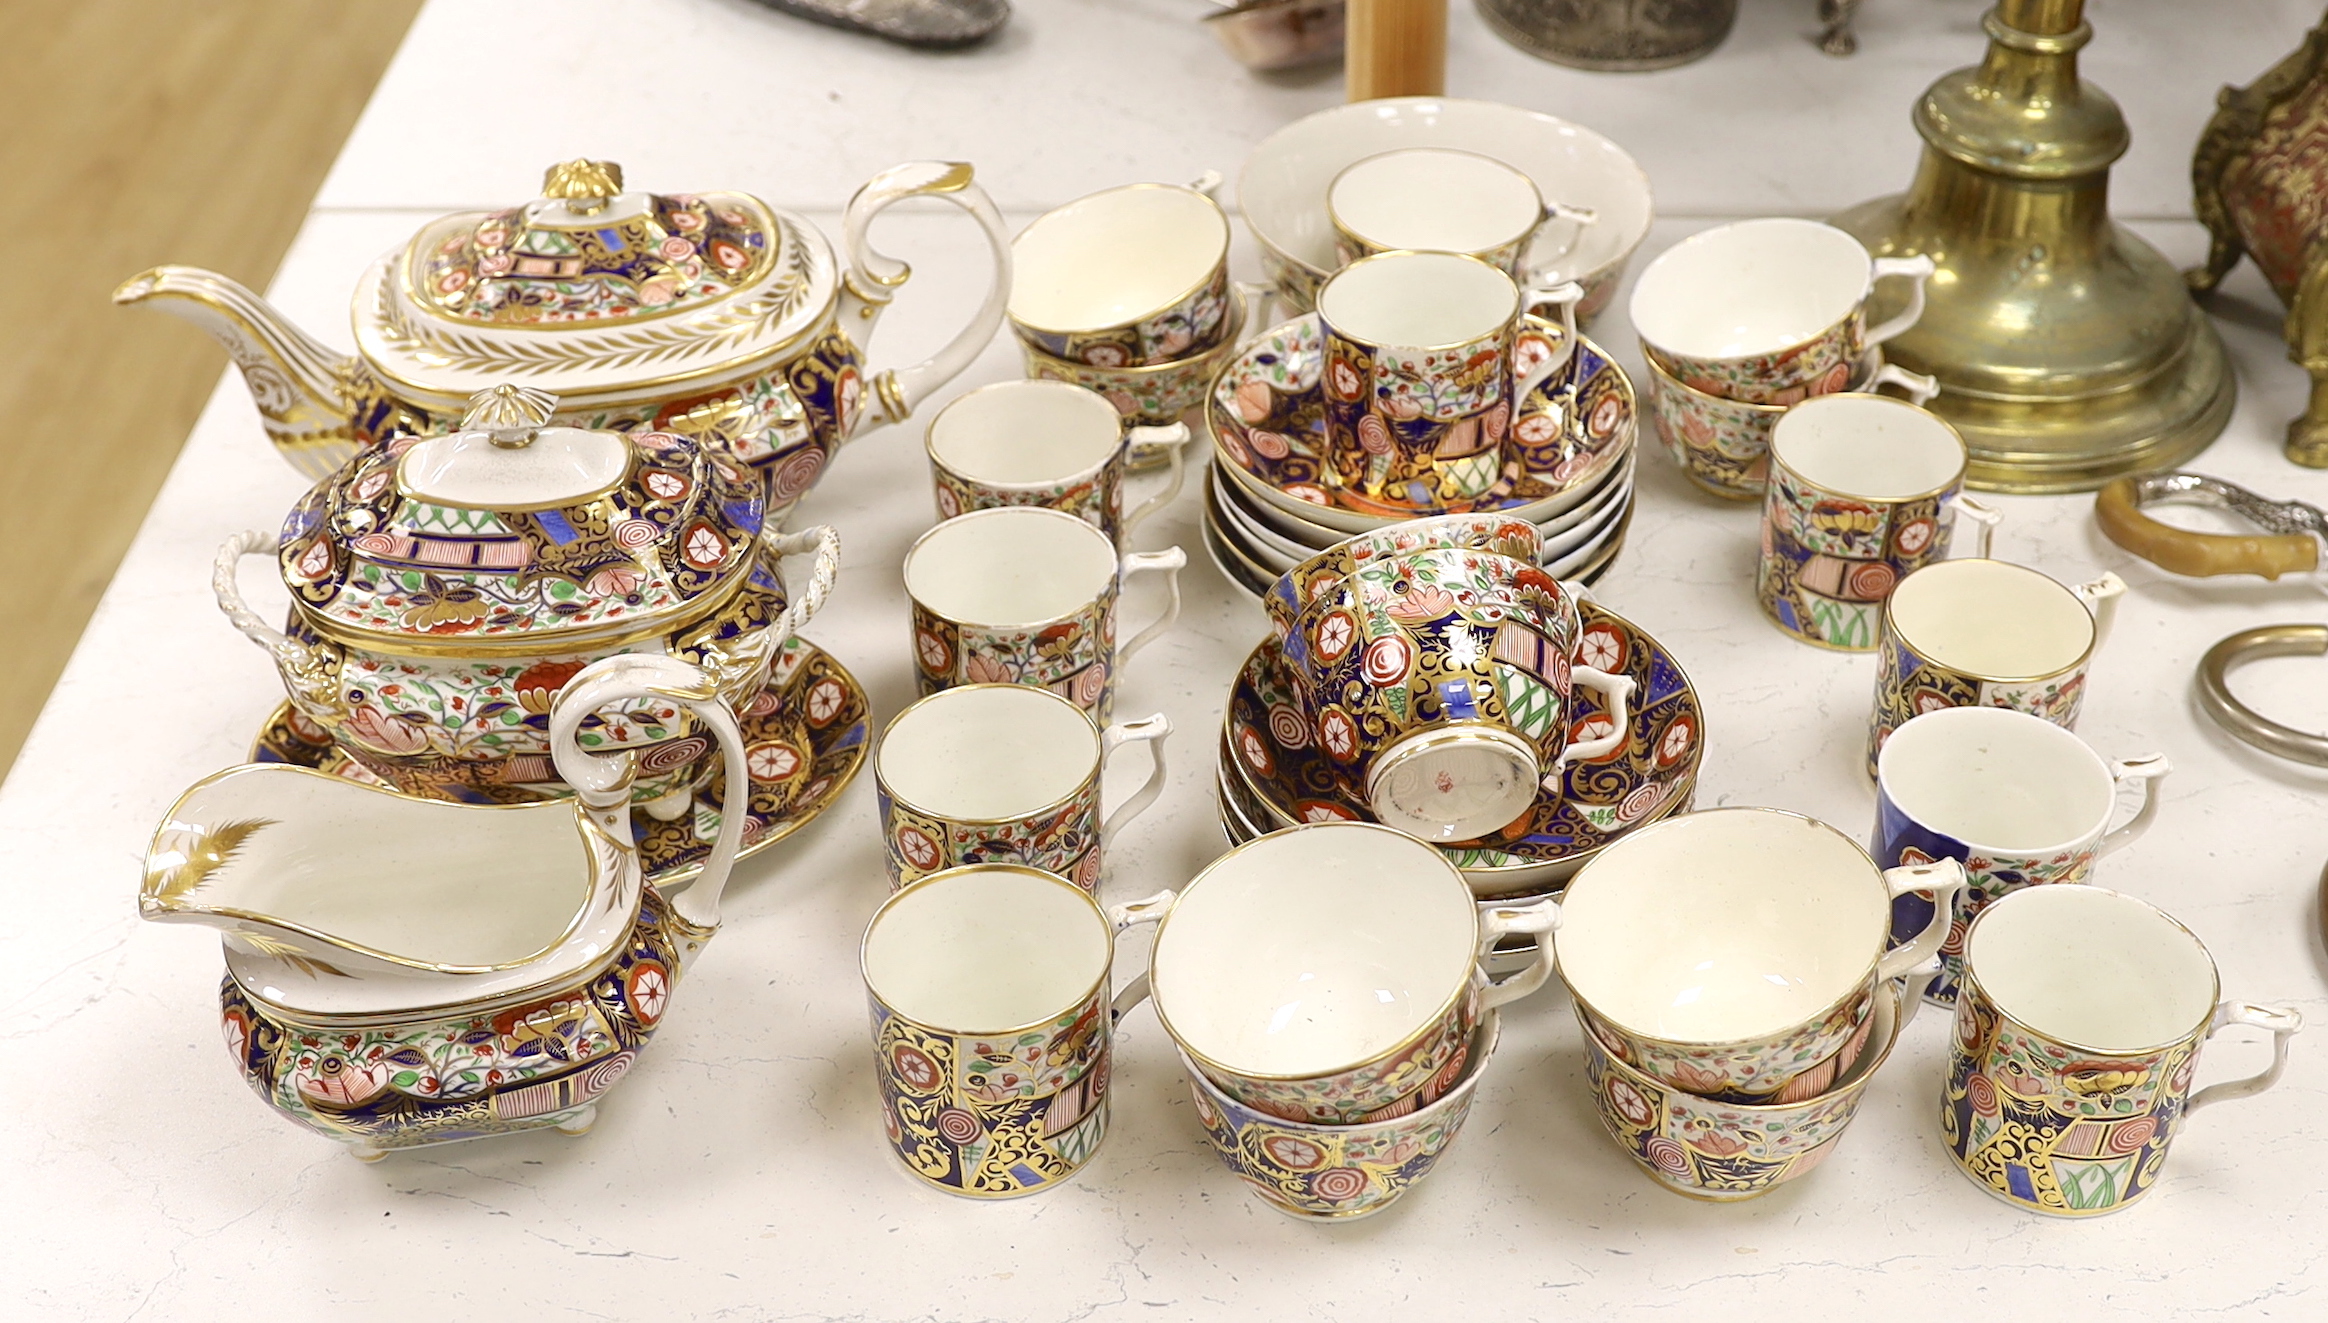 An early 19th century Derby Japan pattern part tea and coffee set, including cups and saucers, teapot, milk jug and bowl